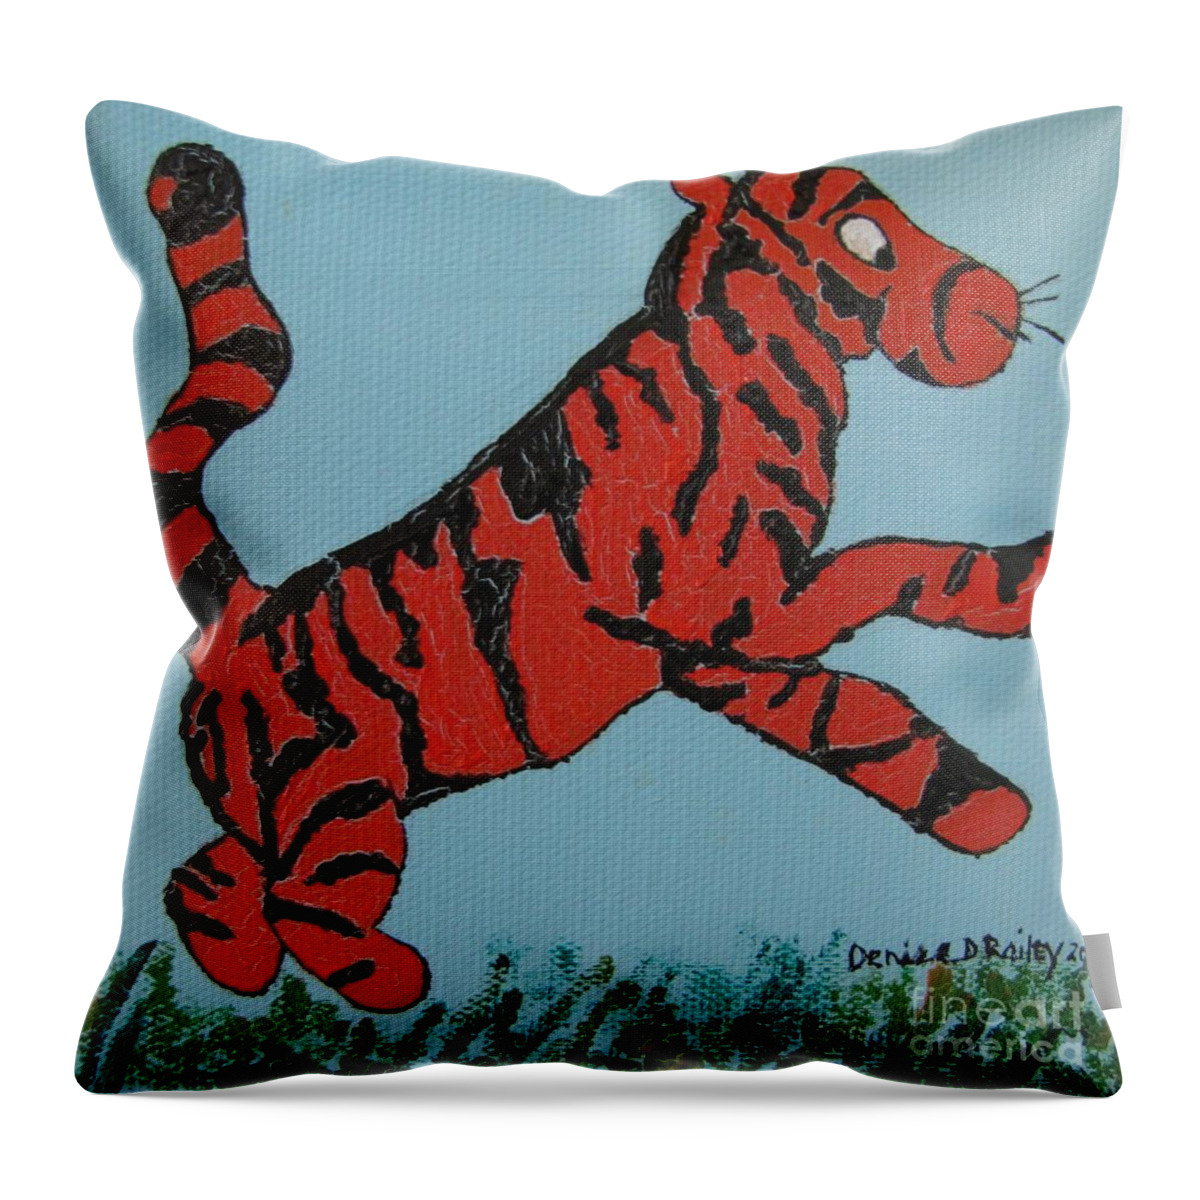 Tigger Throw Pillow featuring the painting Bounce by Denise Railey